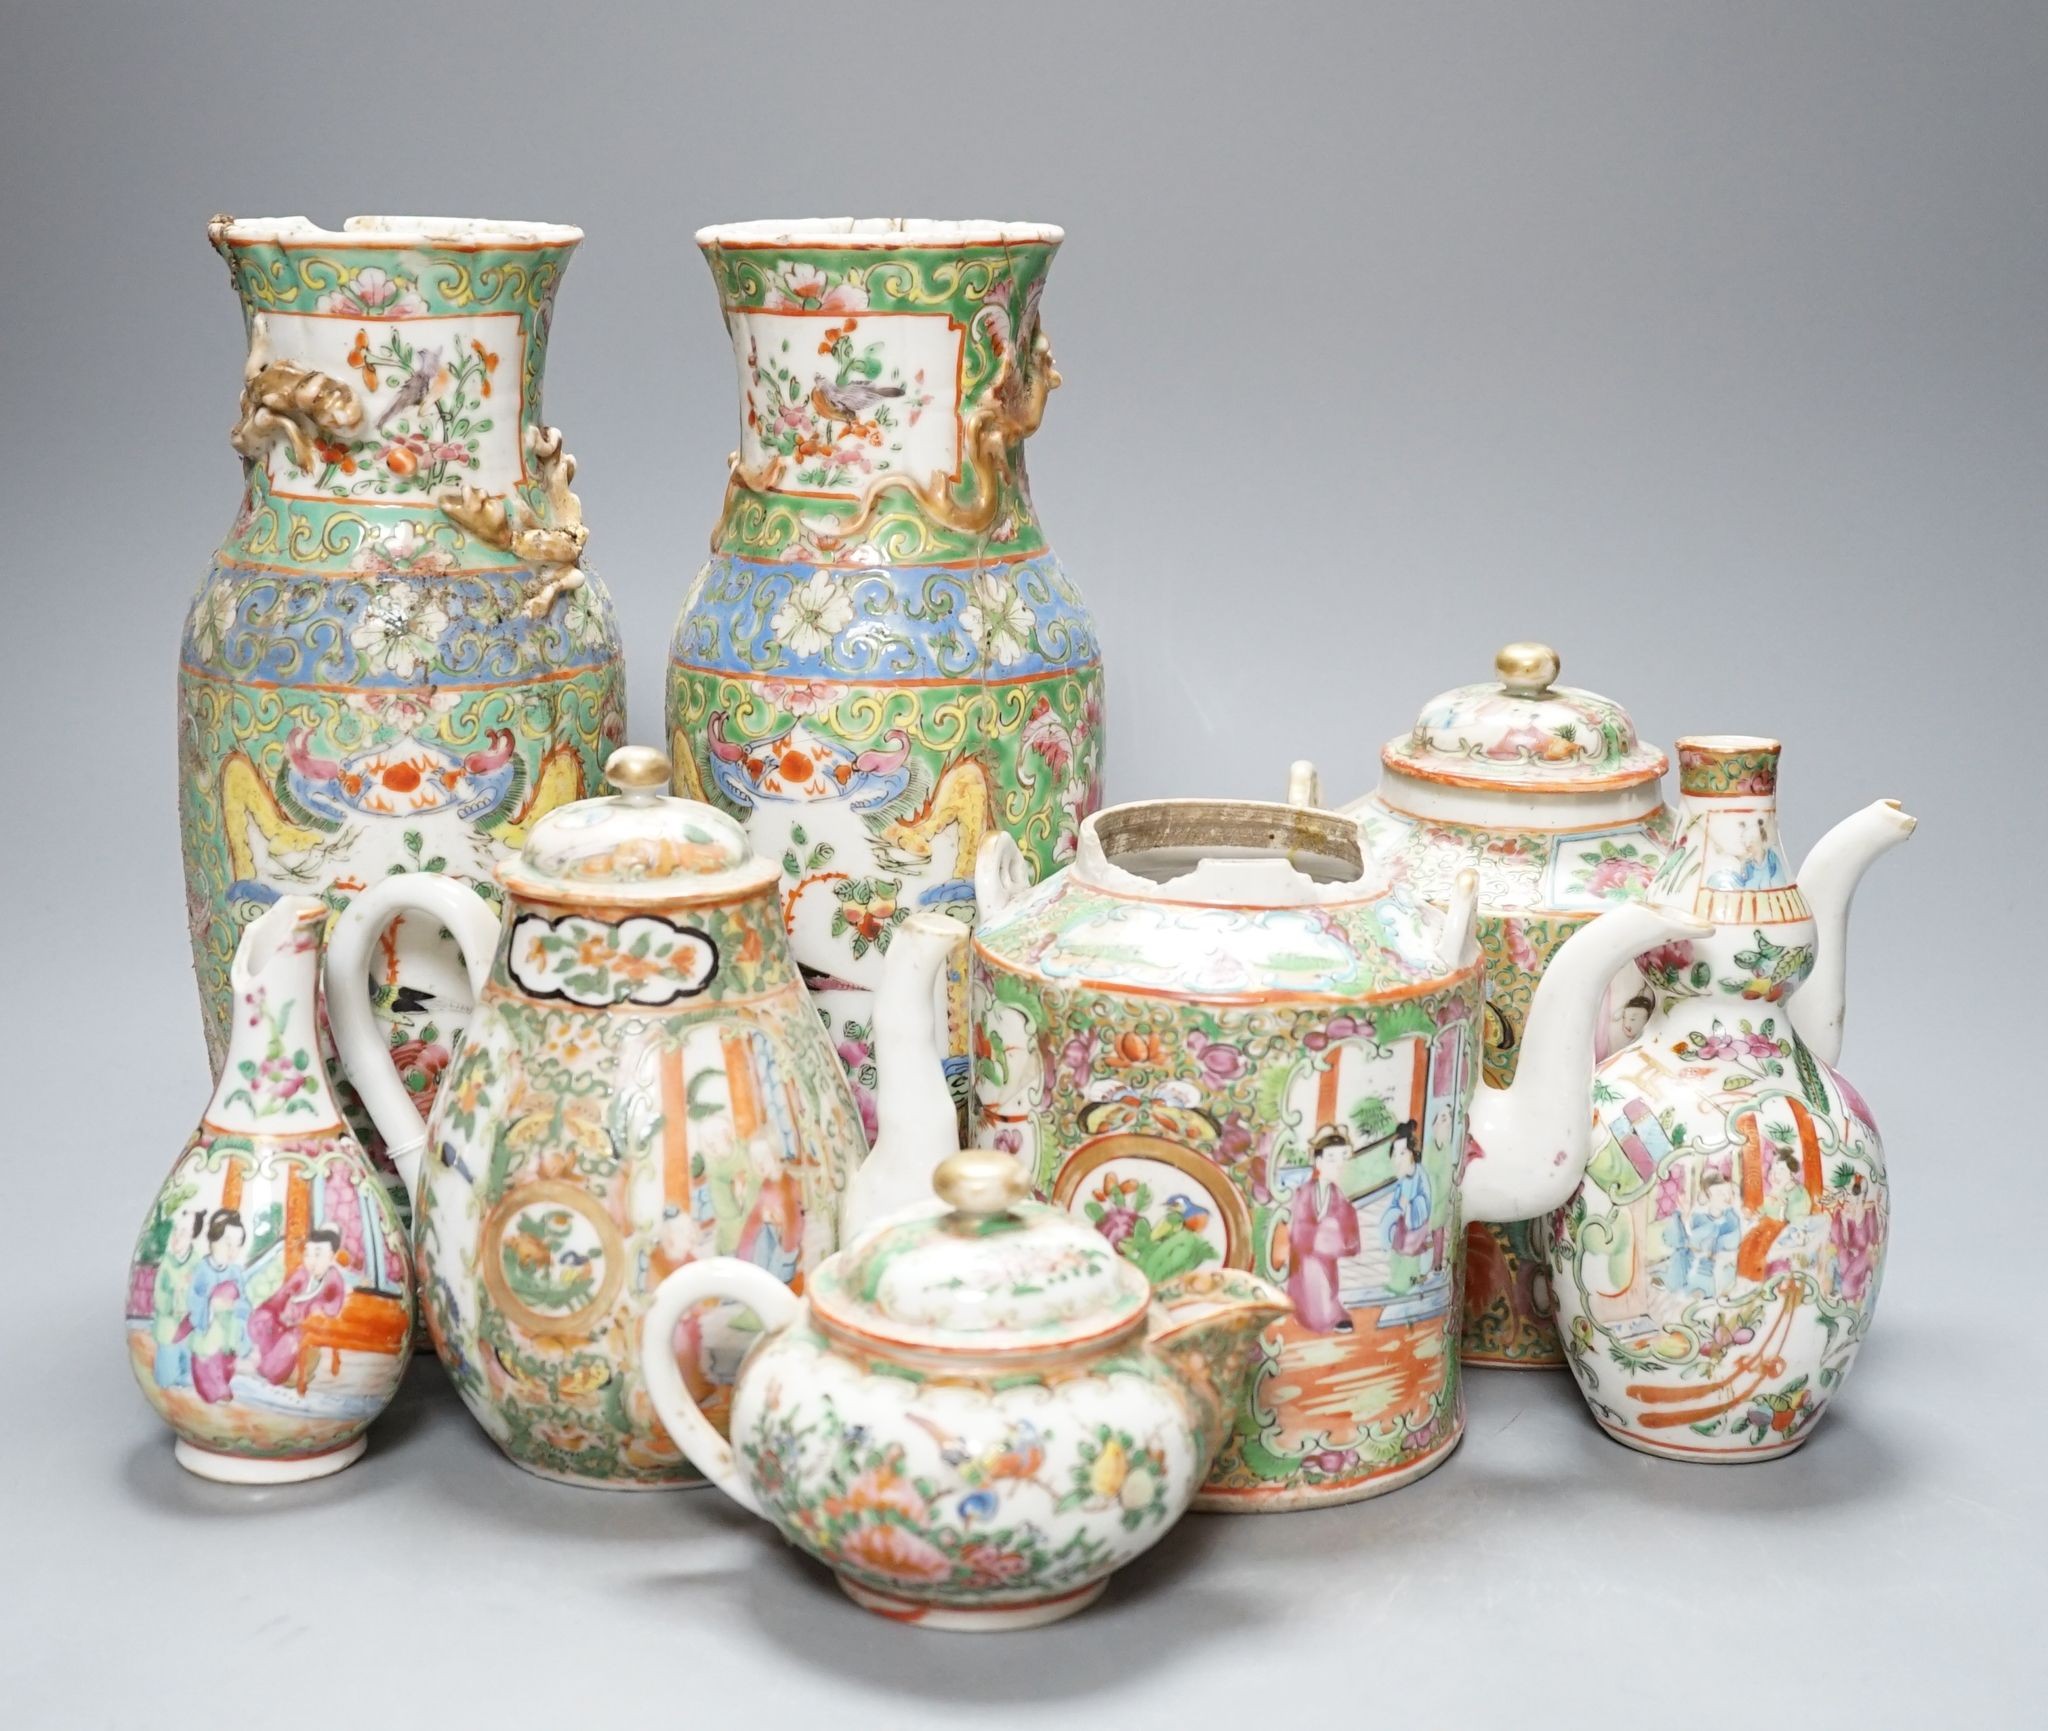 A group of Canton famille teawares and vases, largest 25cm